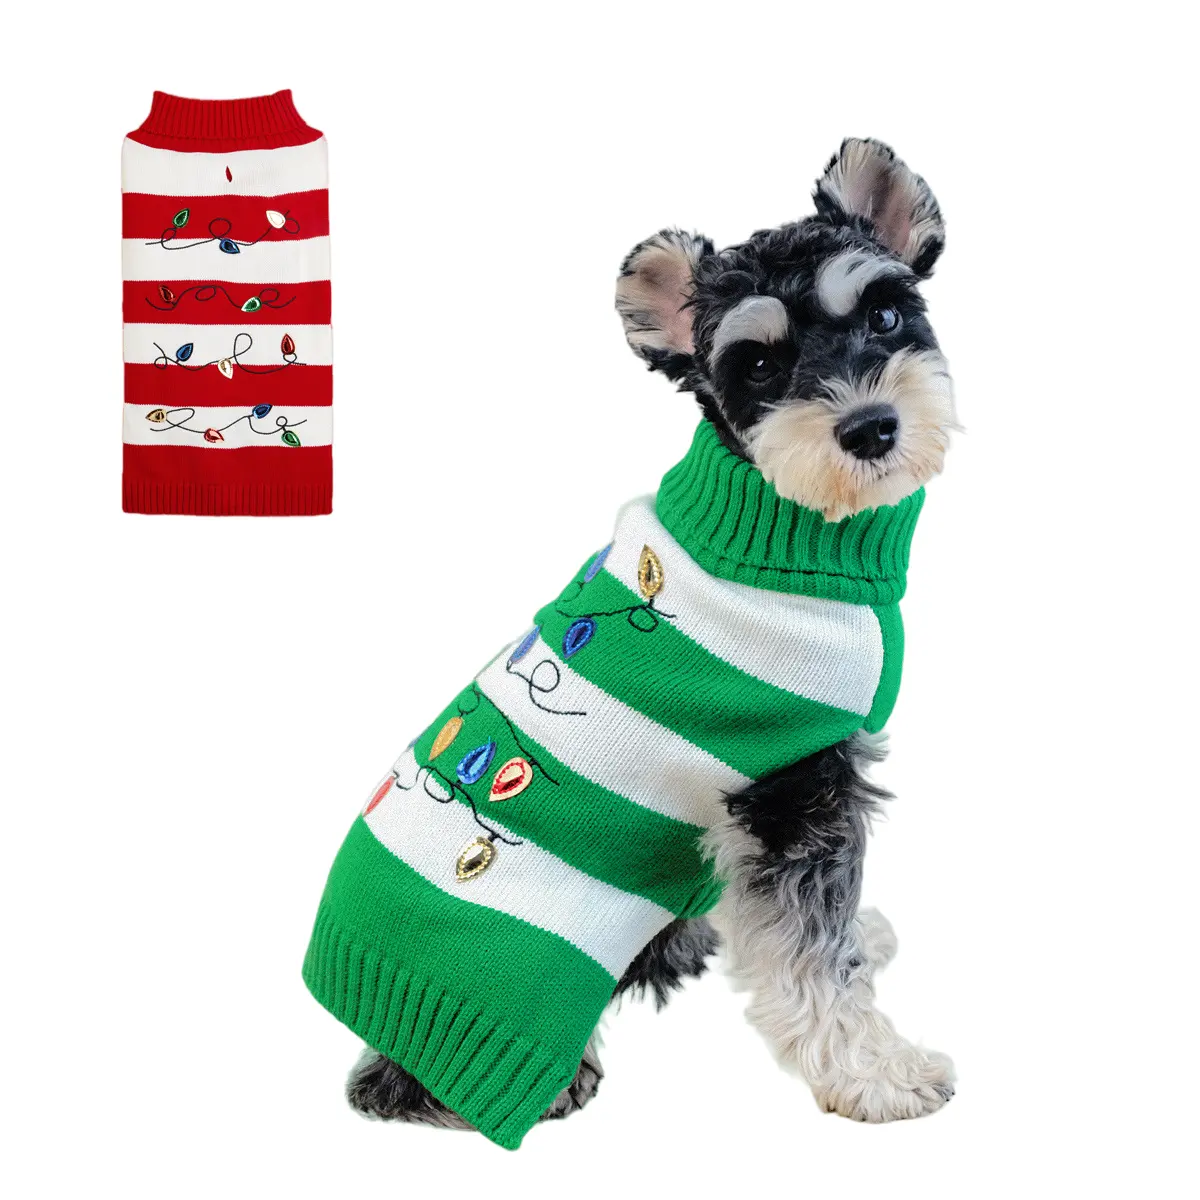 Knit Acrylic Cotton Dog Sweater for Small Dogs Striped Christmas lights Warm and Soft Winter Pet Clothes